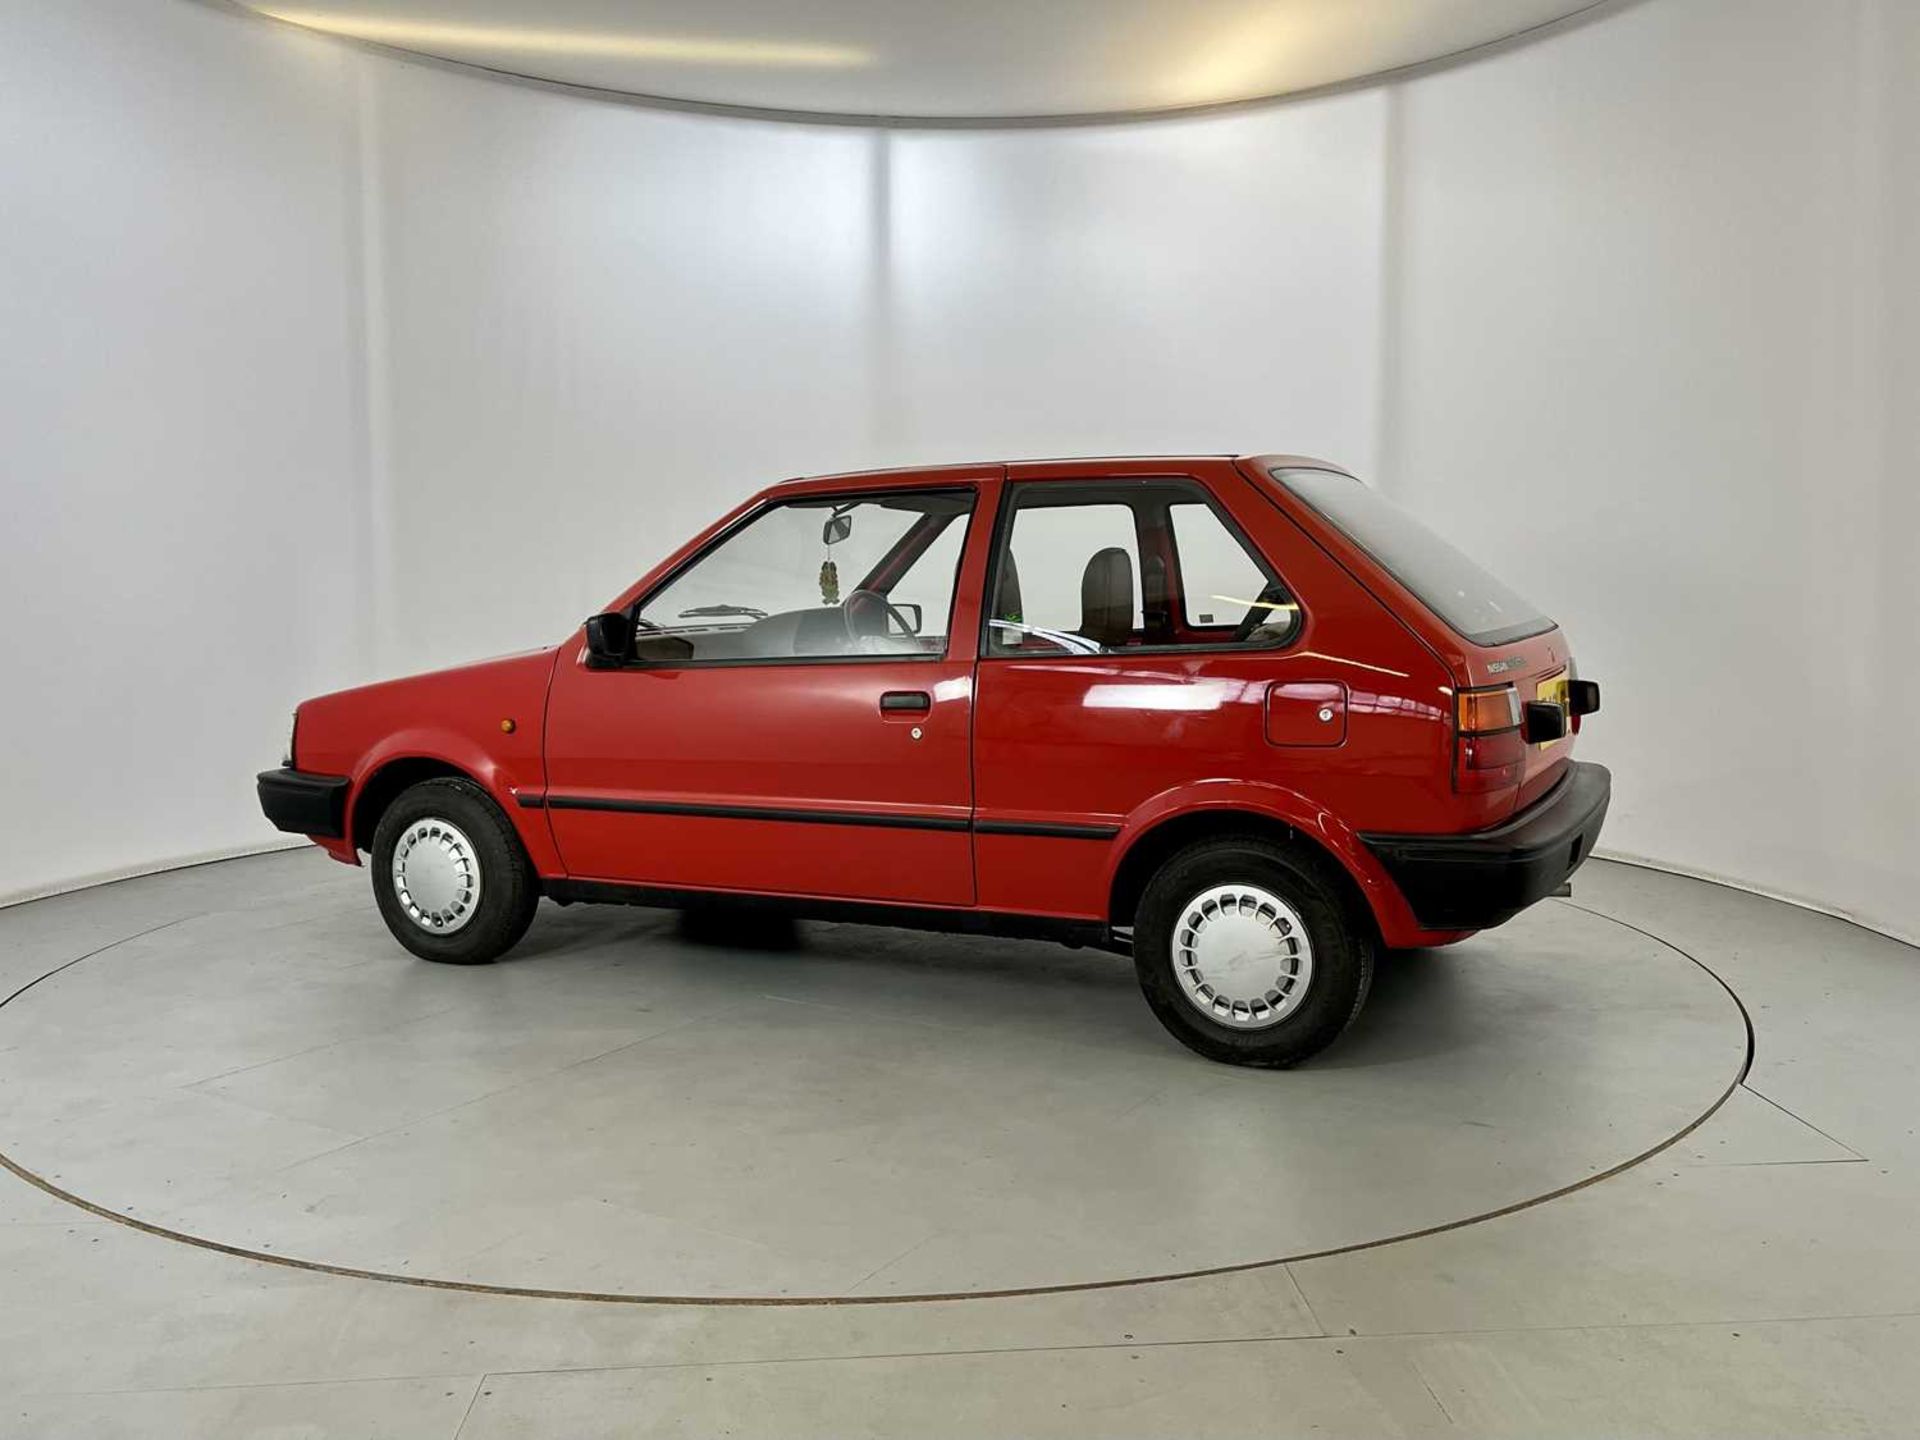 1987 Nissan Micra - Image 6 of 29